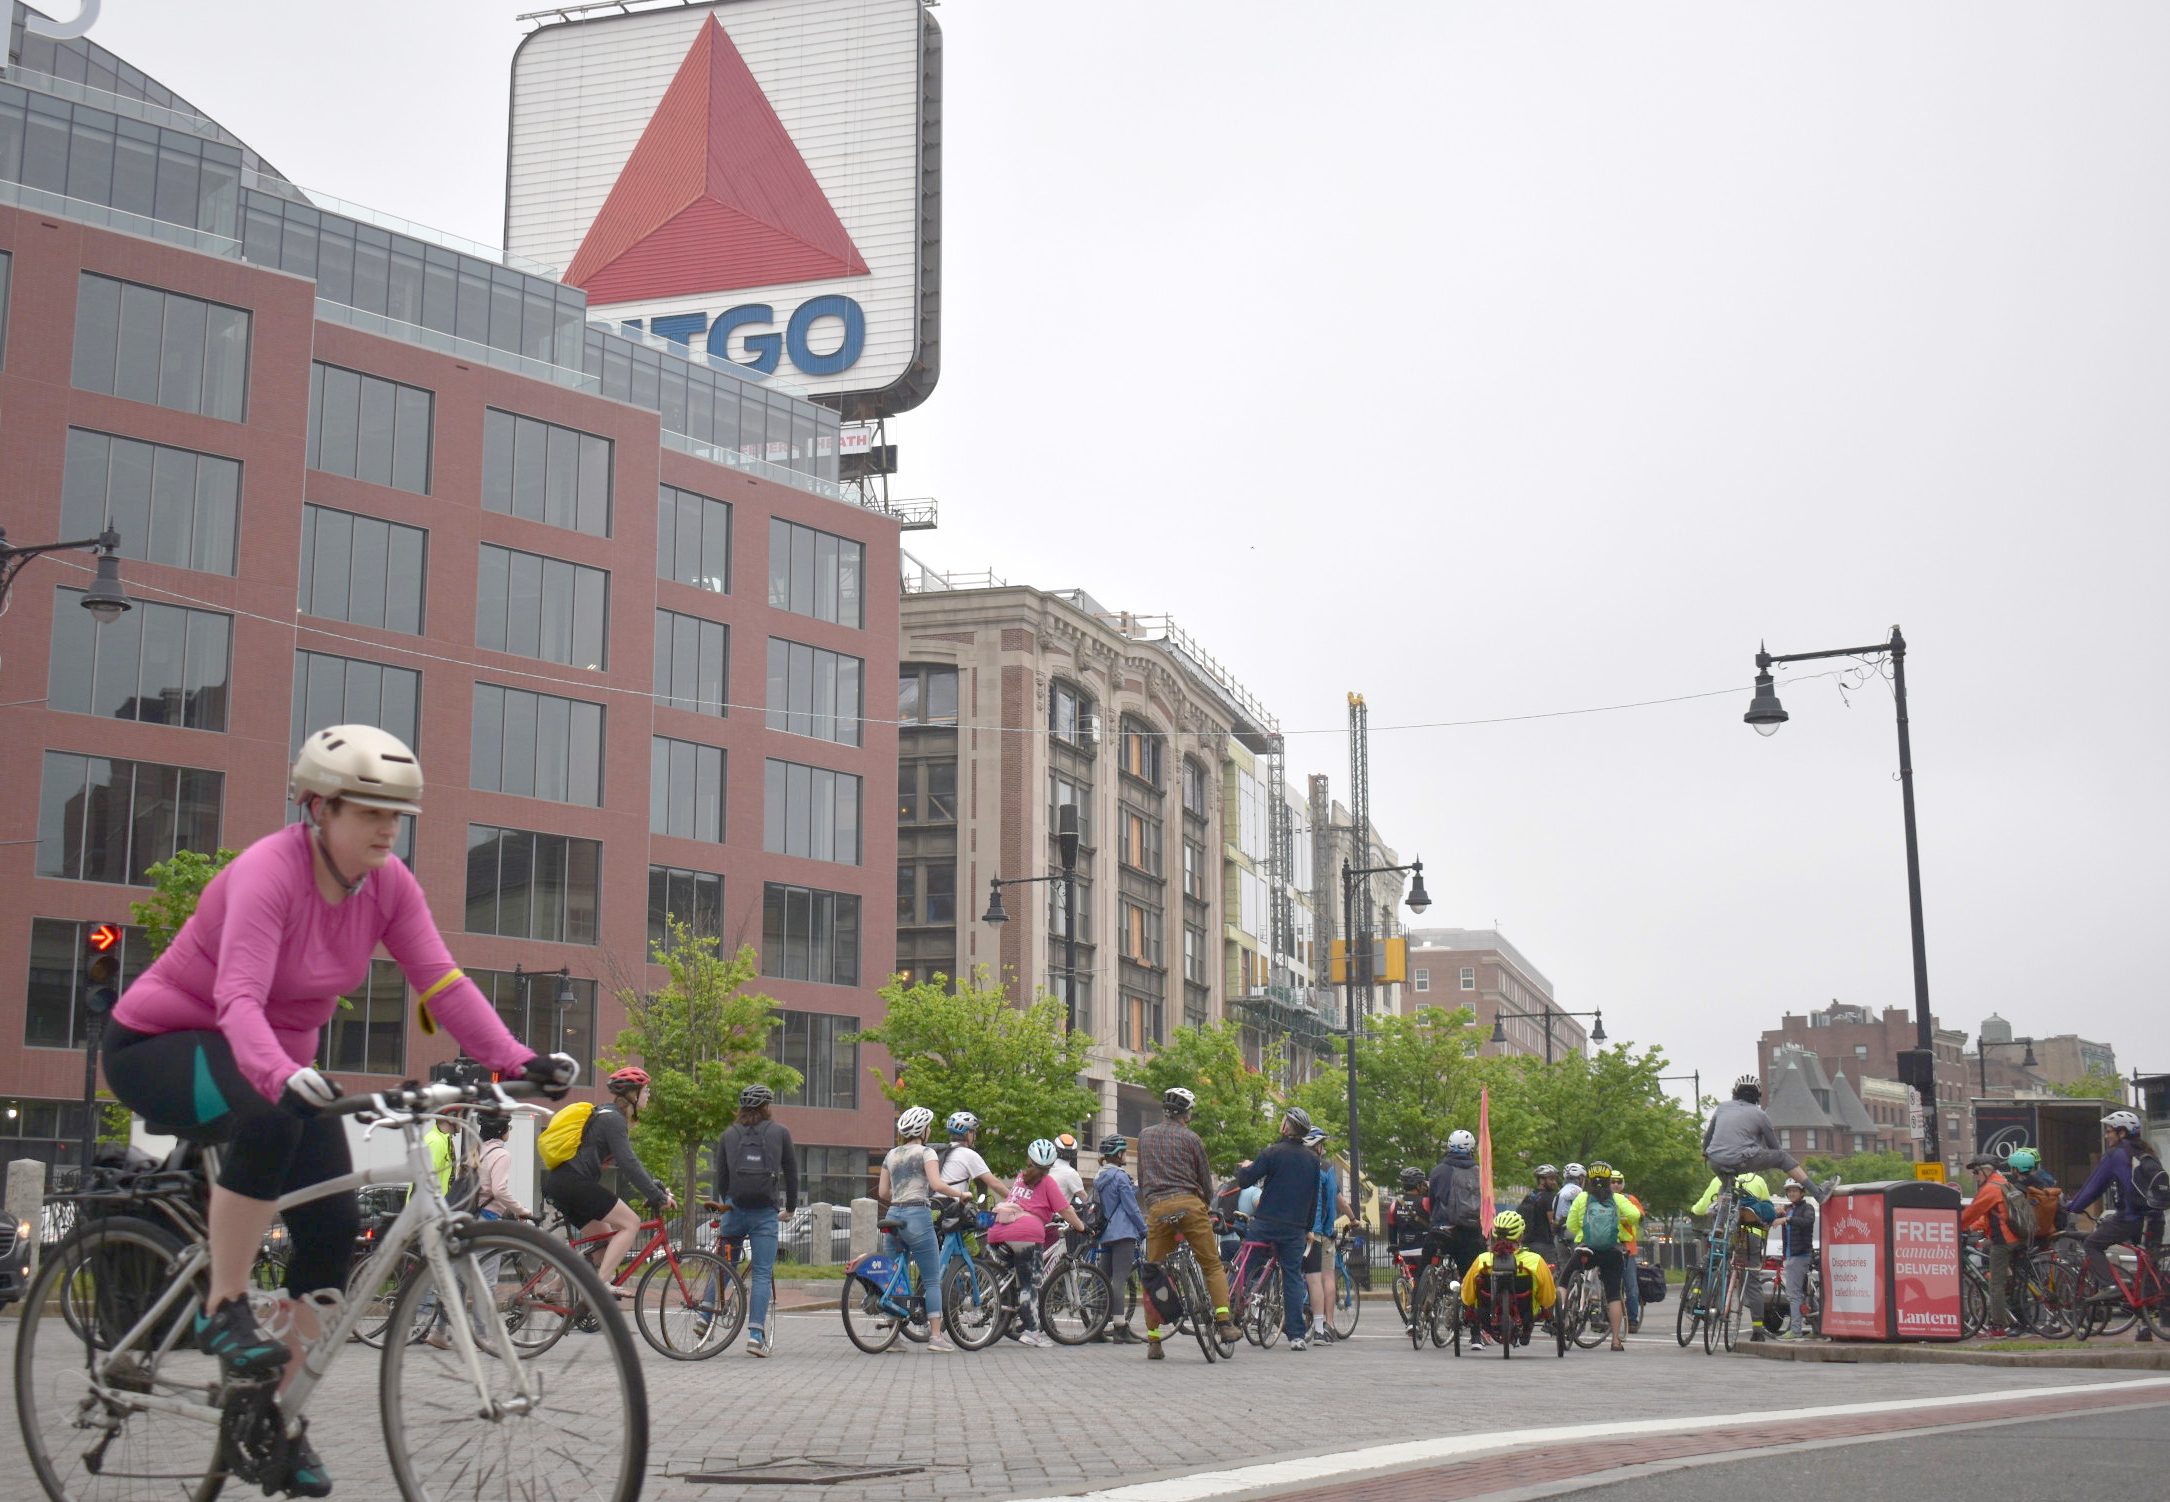 A large crowd of bike riders gathers on Commonwealth Avenue in Kenmore Square beneath the Citgo sign.